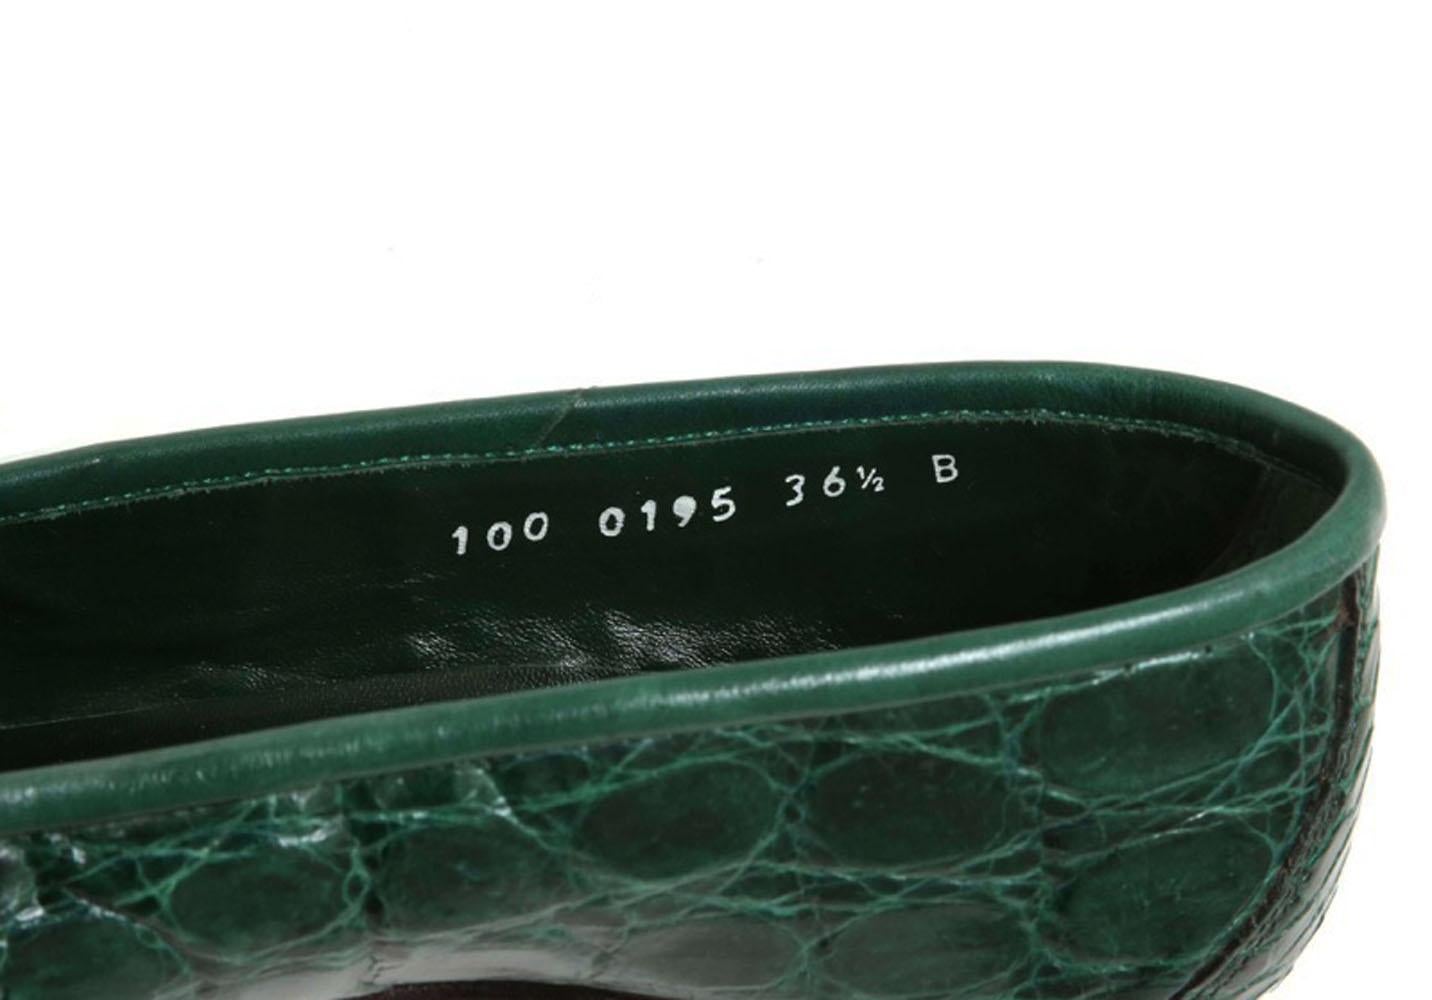 New Vintage Gucci Emerald Green Crocodile Women's Loafers 36.5 B - US 6.5 In New Condition For Sale In Montgomery, TX